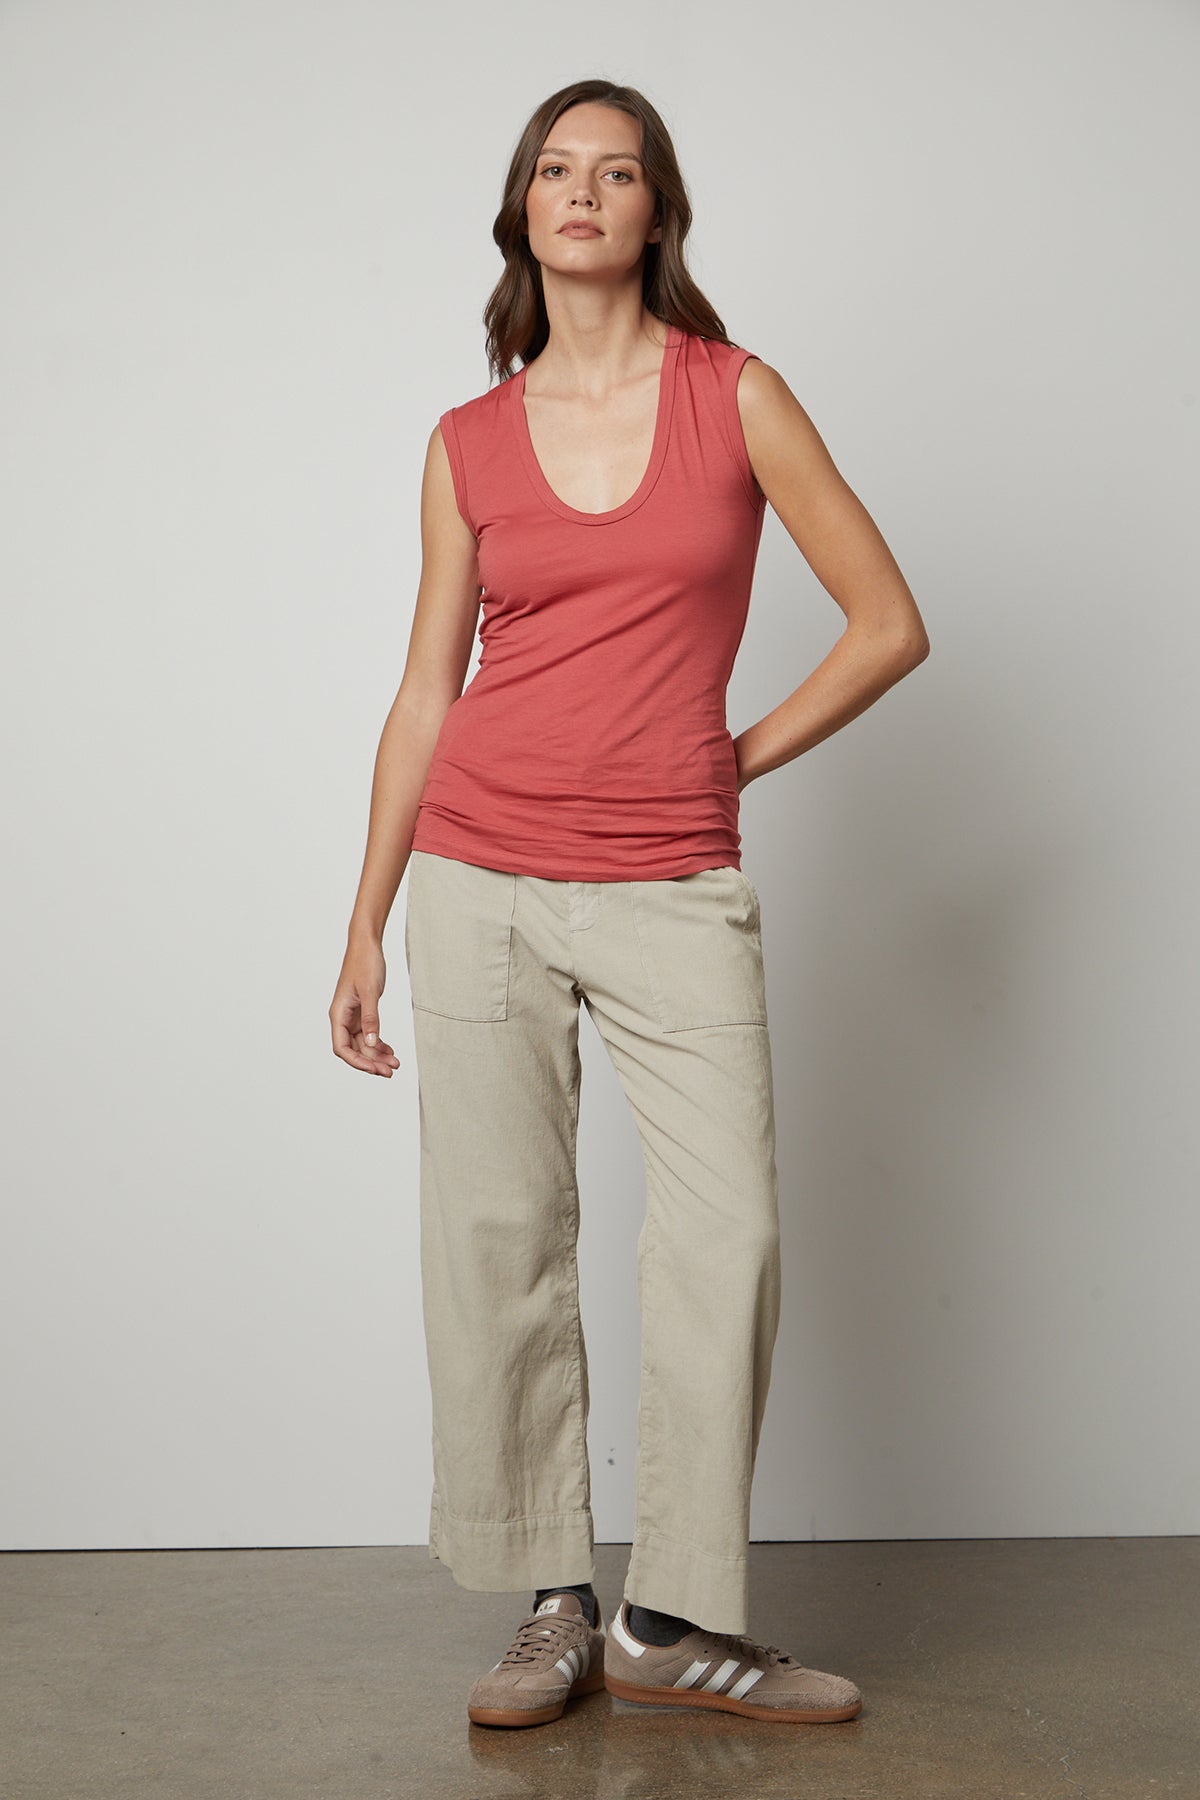 A woman wearing a Velvet by Graham & Spencer ESTINA GAUZY WHISPER FITTED TANK TOP and khaki pants.-35782798213313